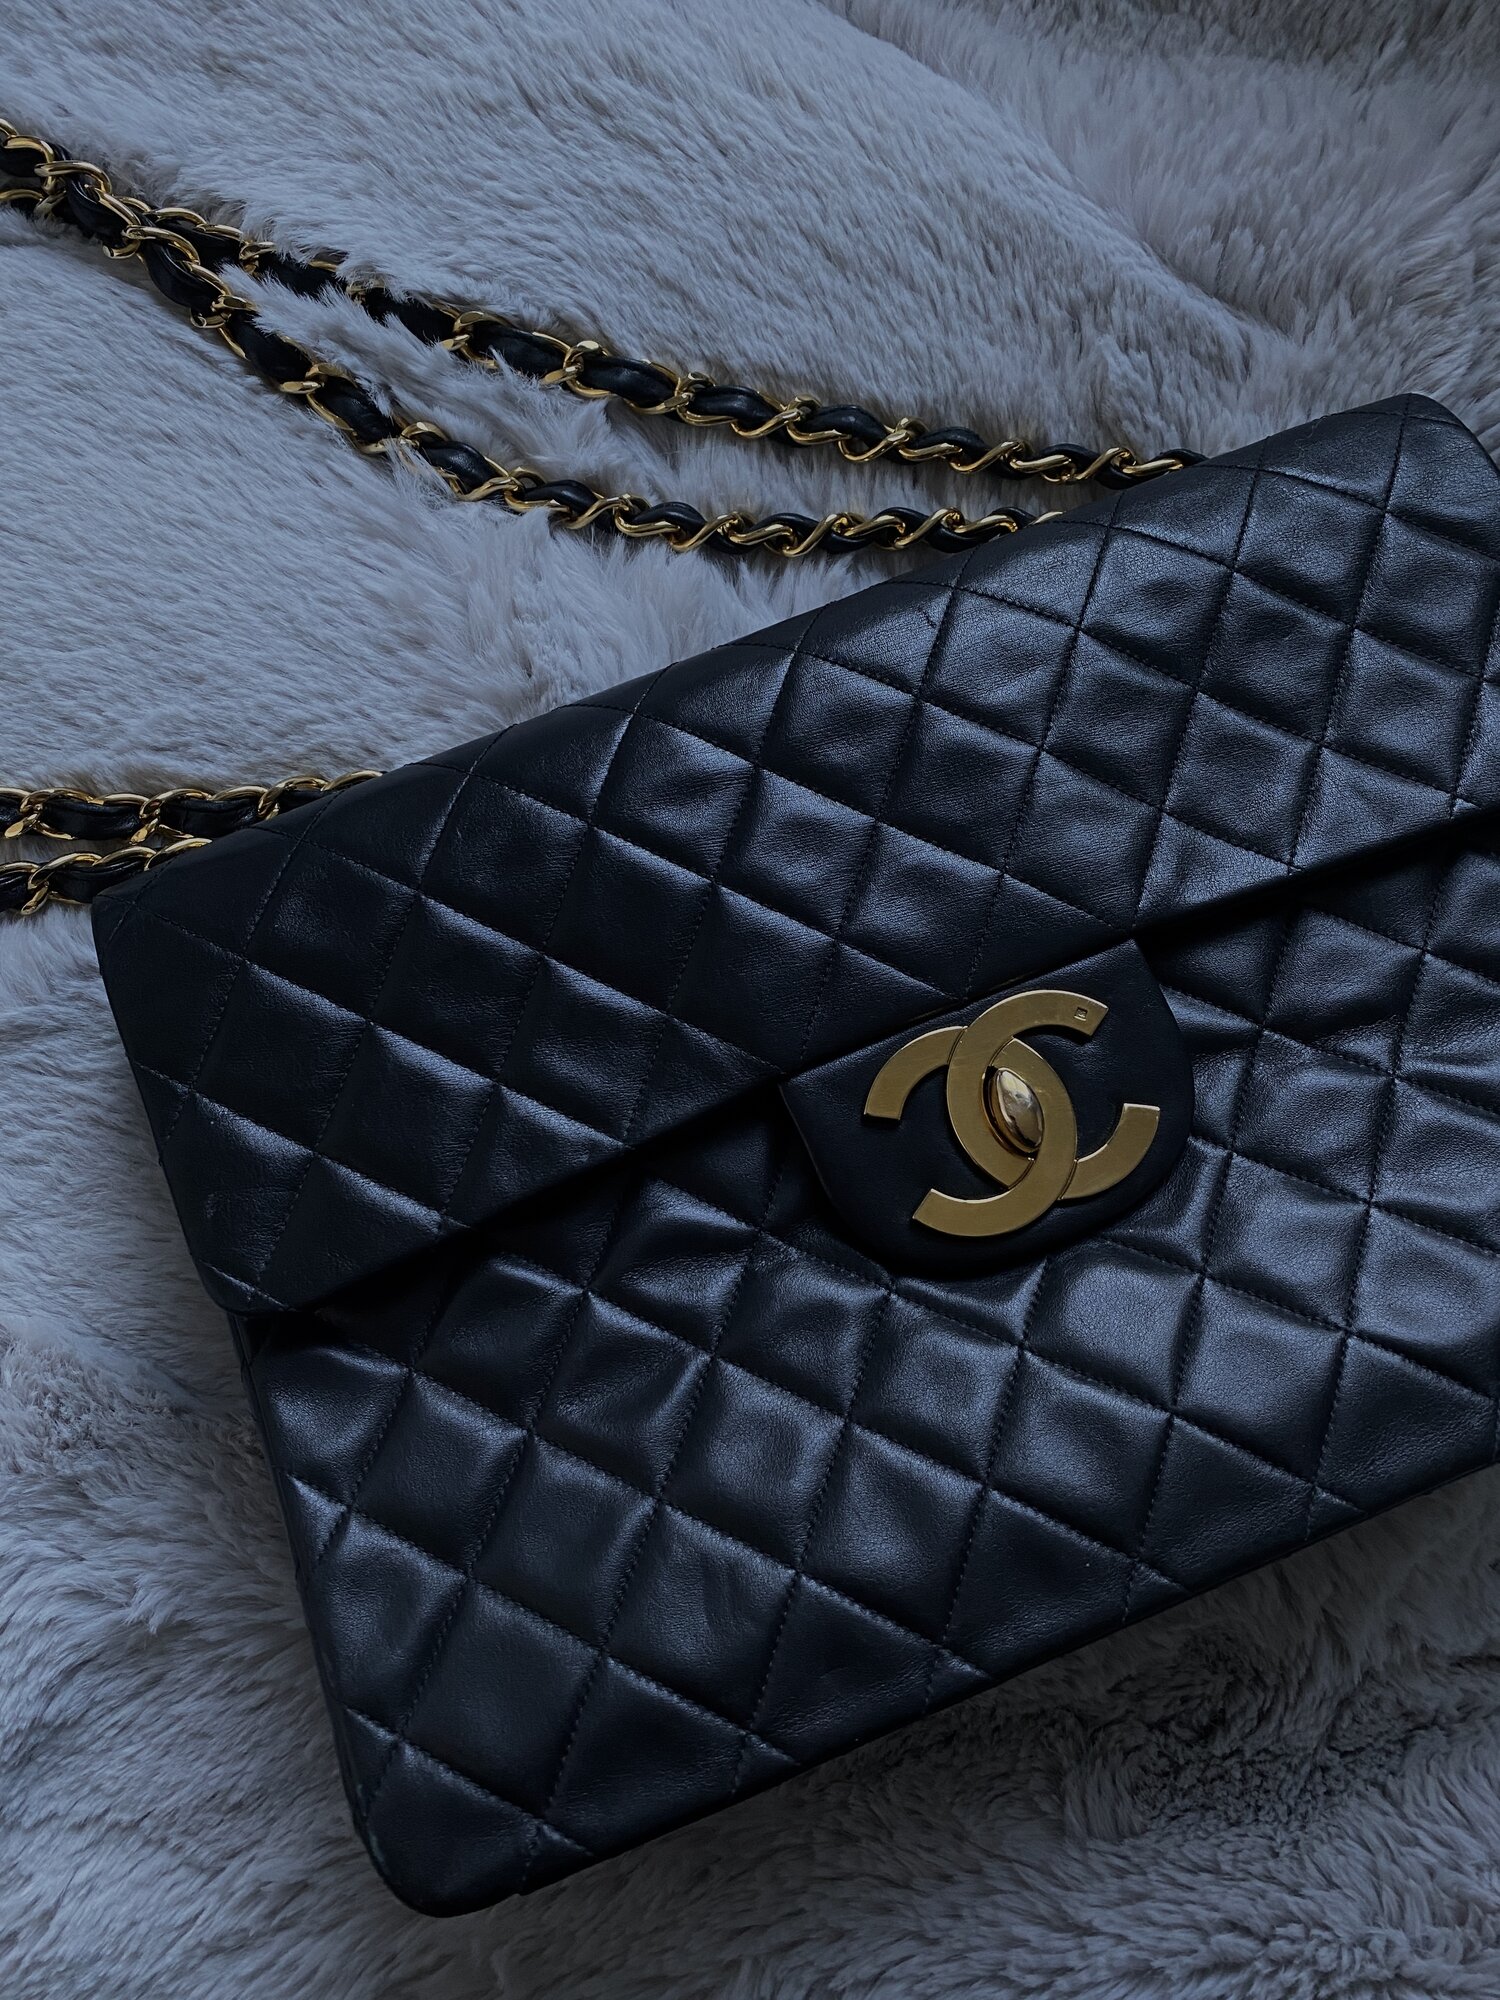 brand new chanel bag authentic